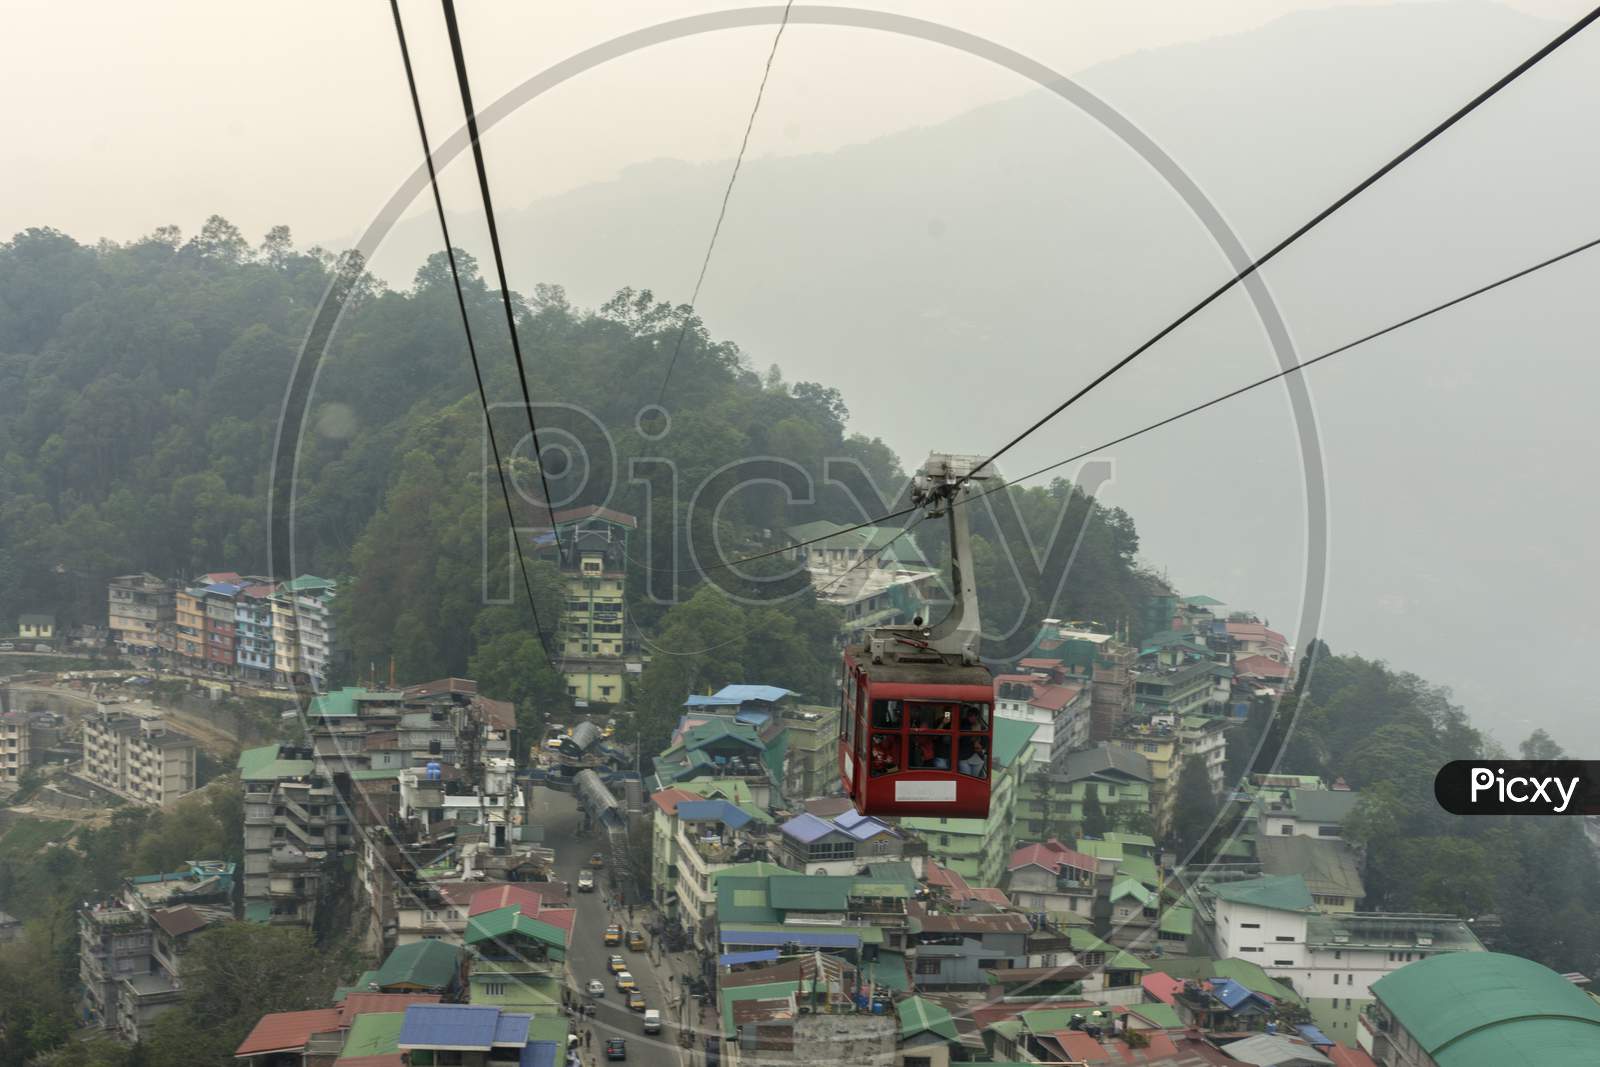 28Th March, 2021, Gangtok, Sikkim, India: Tourists Enjoying A Rope Way Cable Car Or Gondola Ride Over Gangtok City During Sunset. Amazing Aerial View Of Sikkim